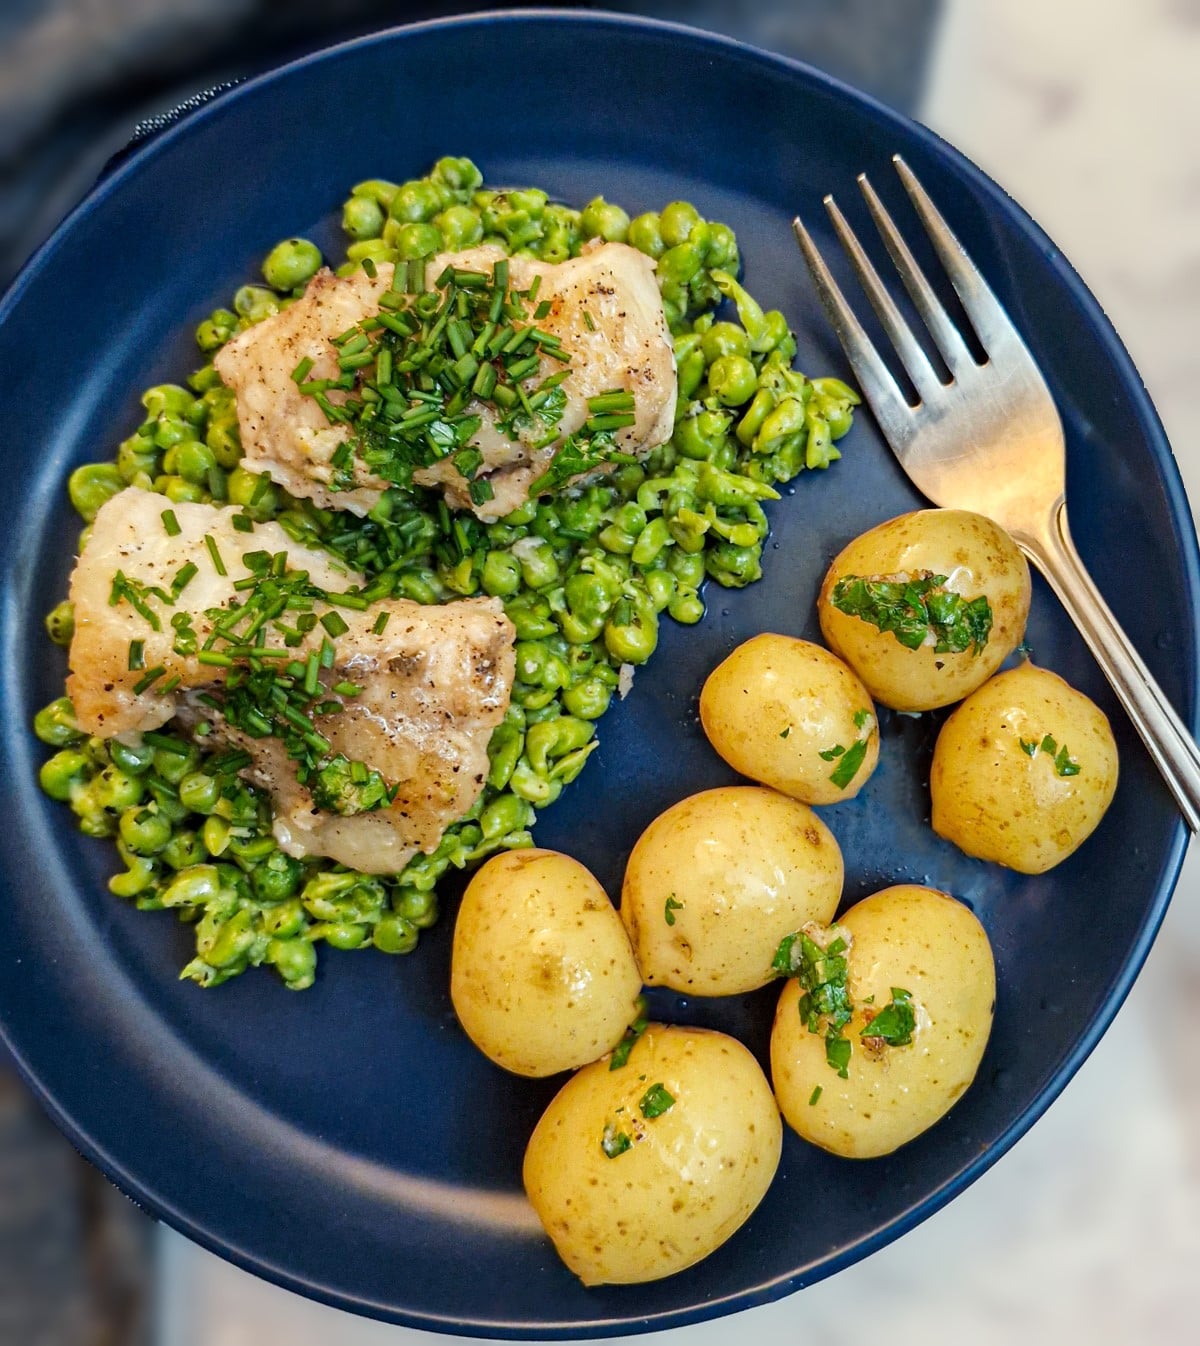 A blue plate with a helping of smashed minted peas topped with two pieces of monkfish, garnished with chives. There is also a small pile of baby potatoes on the plate.